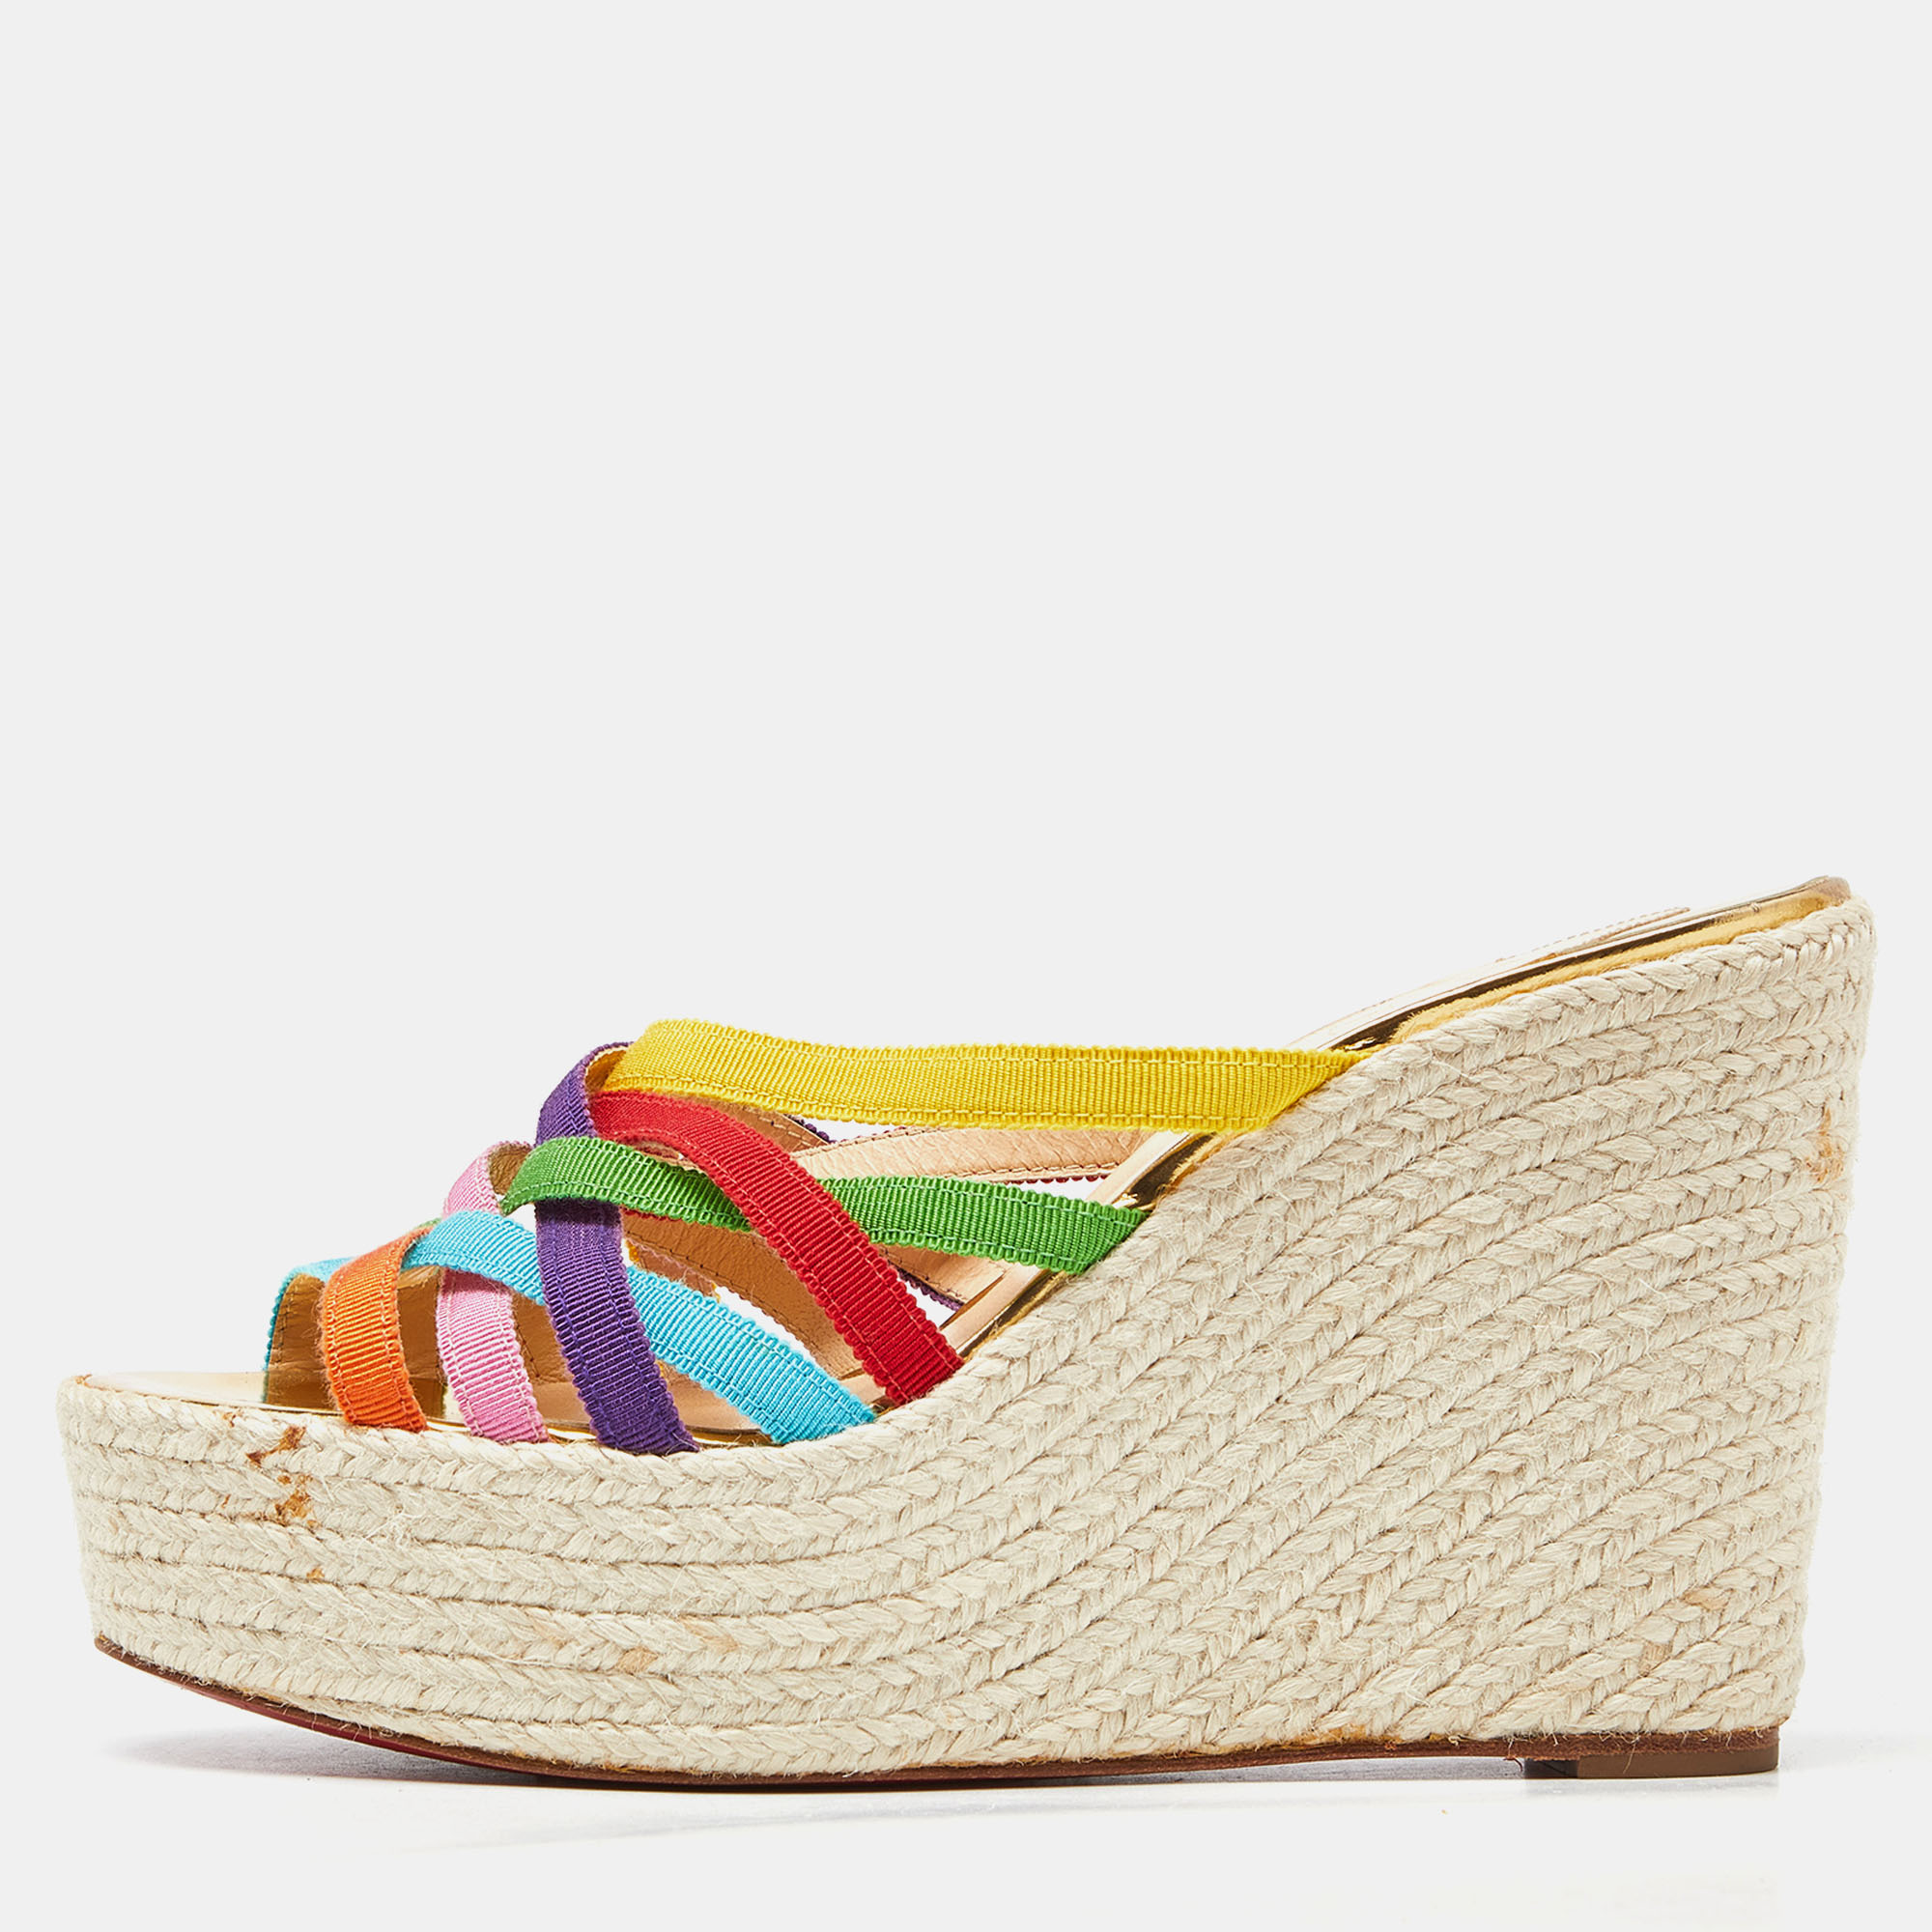 Pre-owned Christian Louboutin Multicolor Fabric Strappy Wedge Espadrille Platform Sandals Size 37